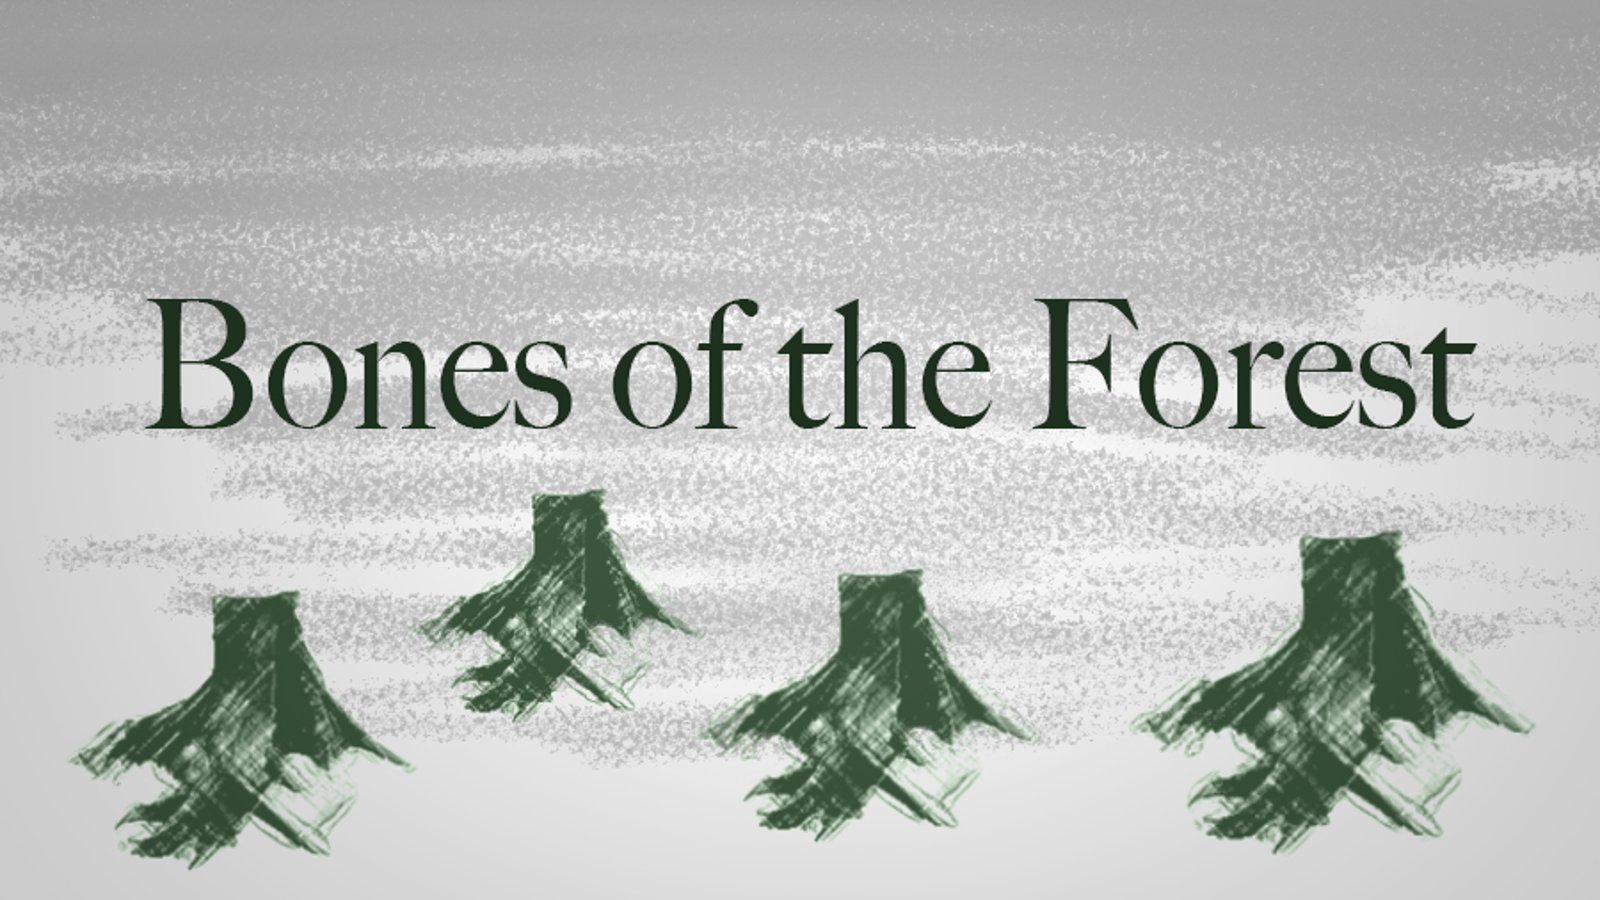 forest preservation documentaries bones of the forest